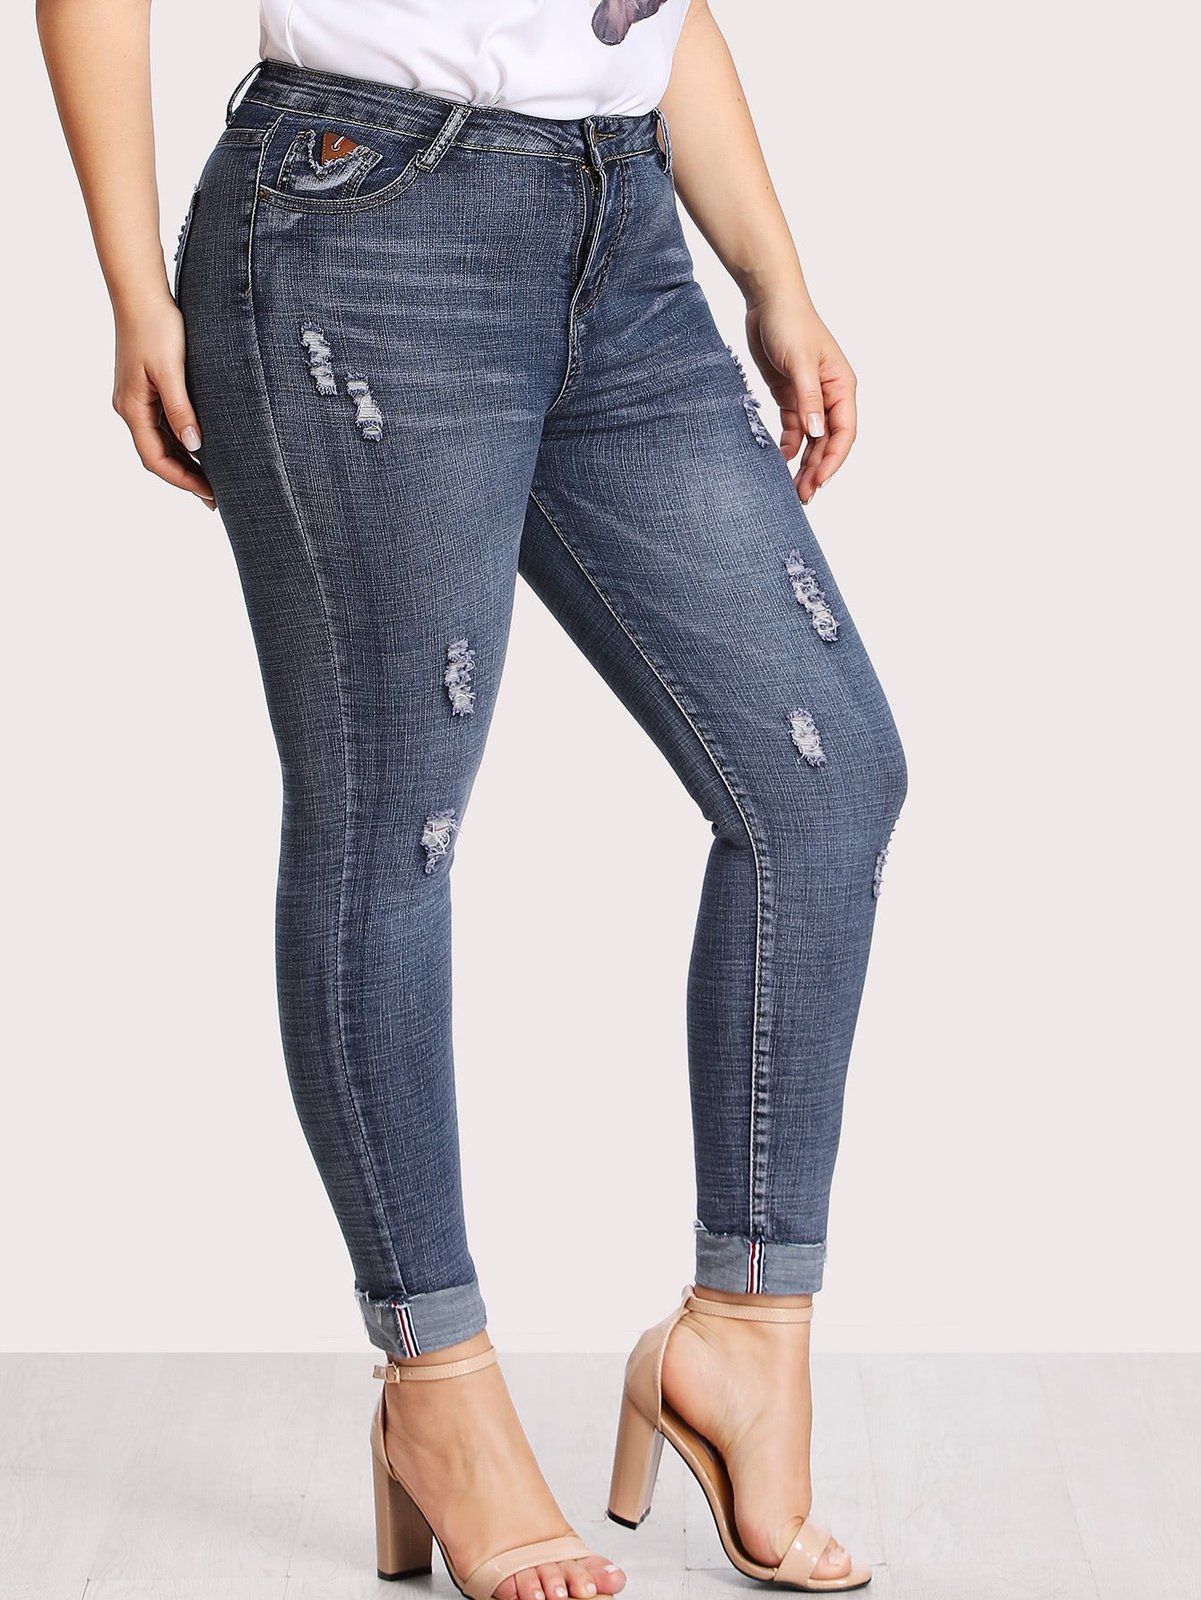 Plus Dual Pocket Back Ripped Jeans - Jeans